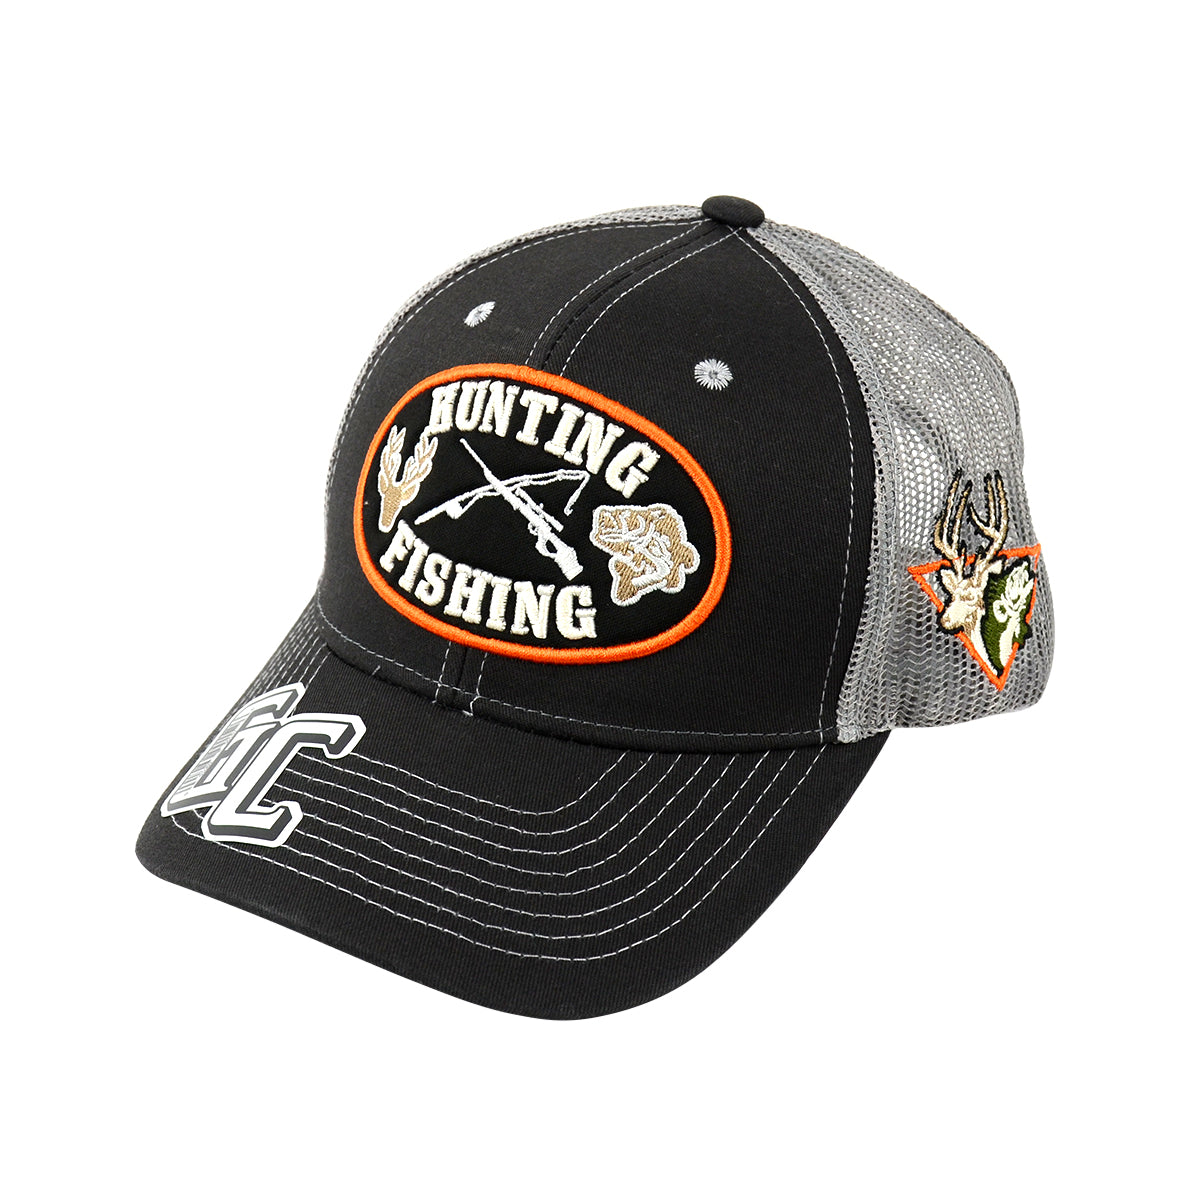 Snapback ''Hunting FISHING'' Hat Net Back Embroidered